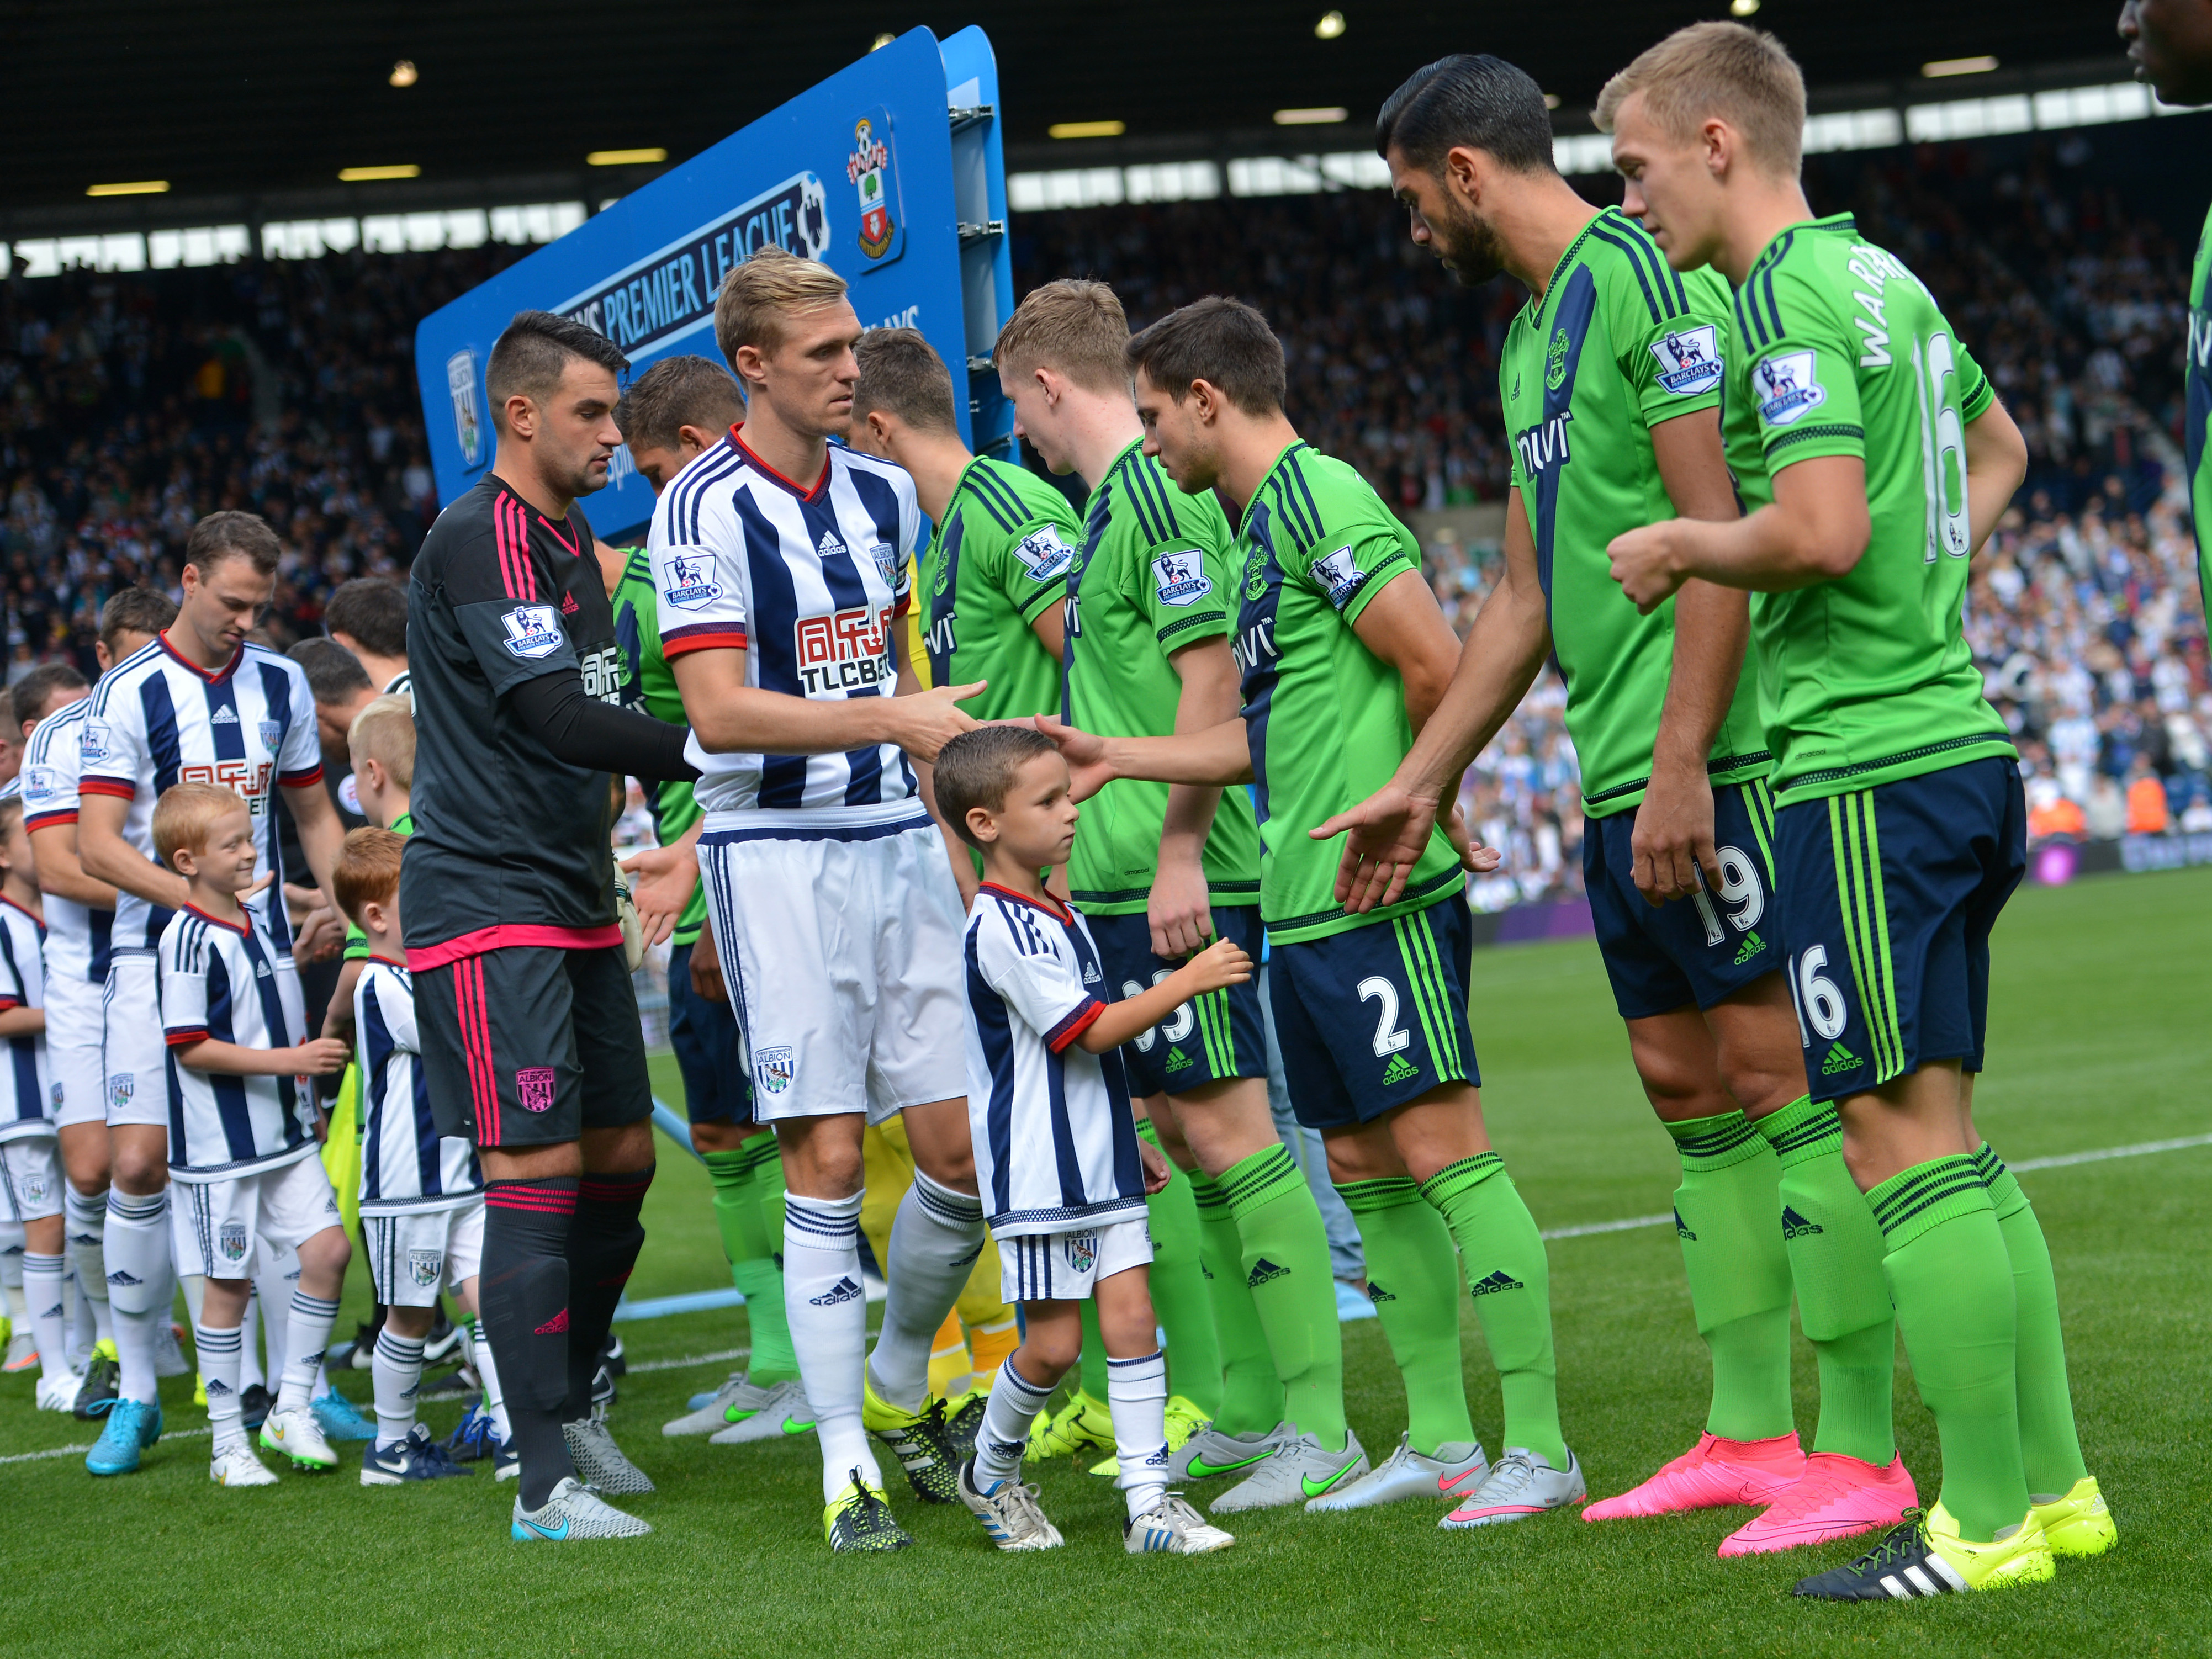 Albion players shake hands with Southampton players ahead of the Premier League match at The Hawthorns in September 2015